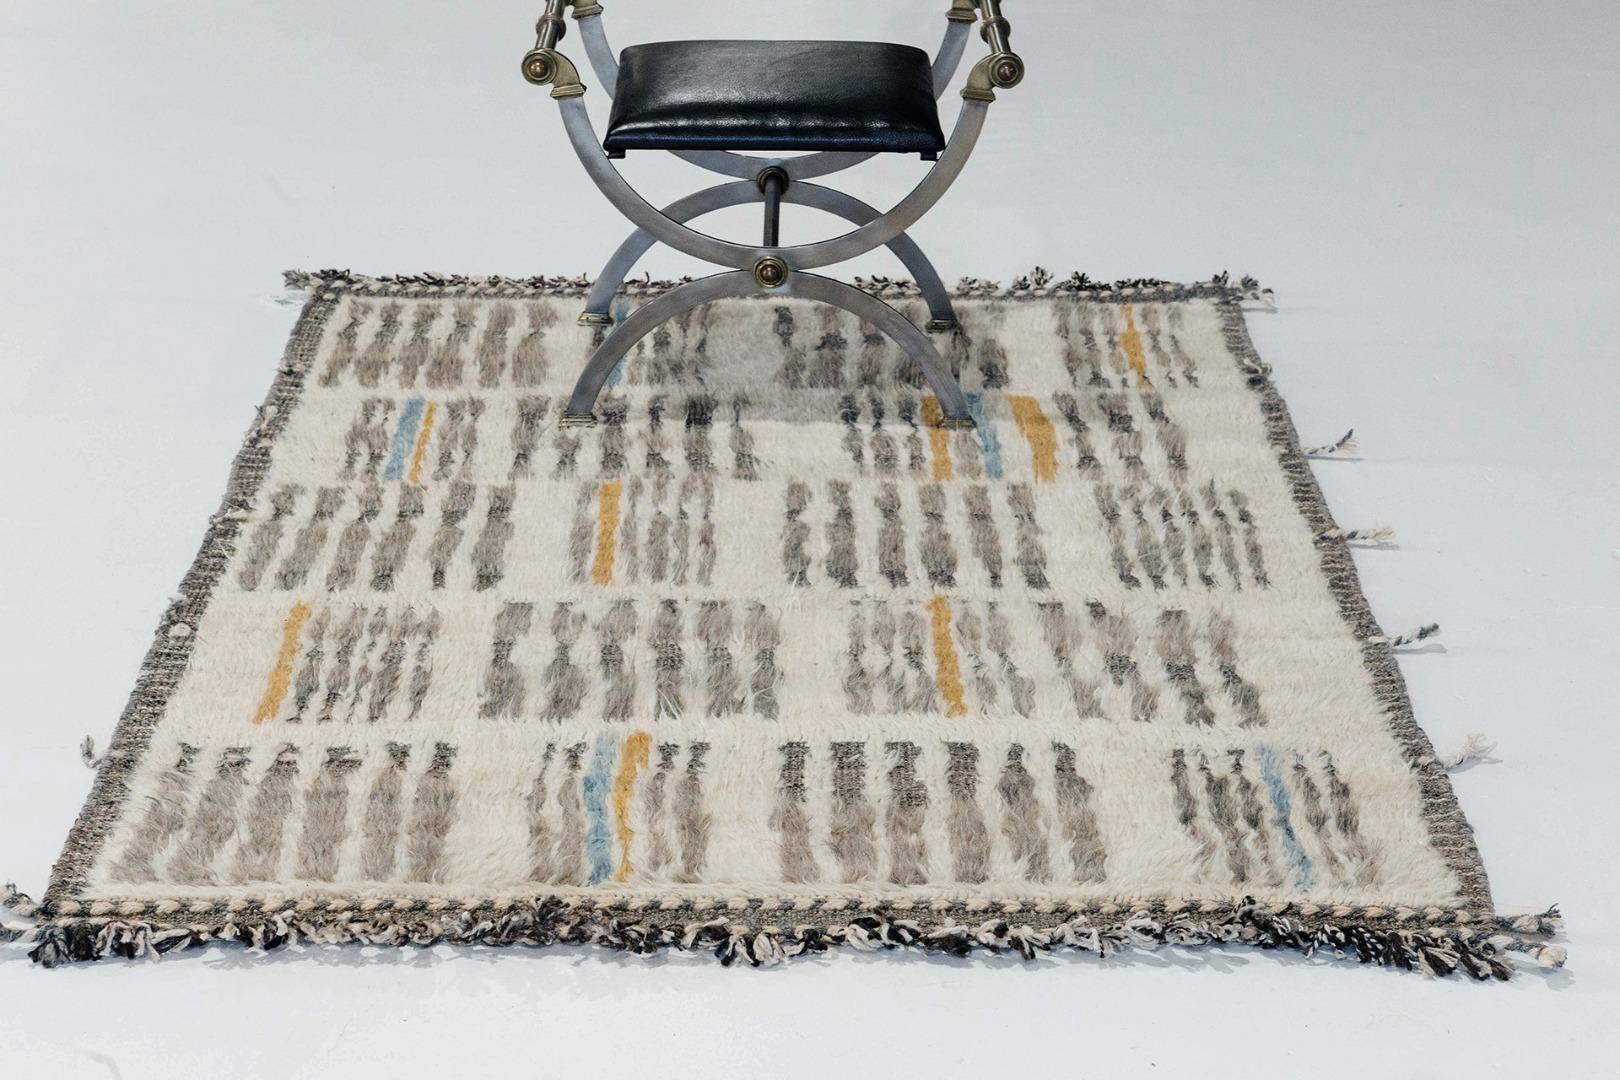 Handwoven of wool, 'Baccata' uses linework and color to create definition and movement. Line detailing in taupe, blue, and orange move across the rug with a ivory shag surface. Detailed natural flat weave runs around the border with tassels adding a